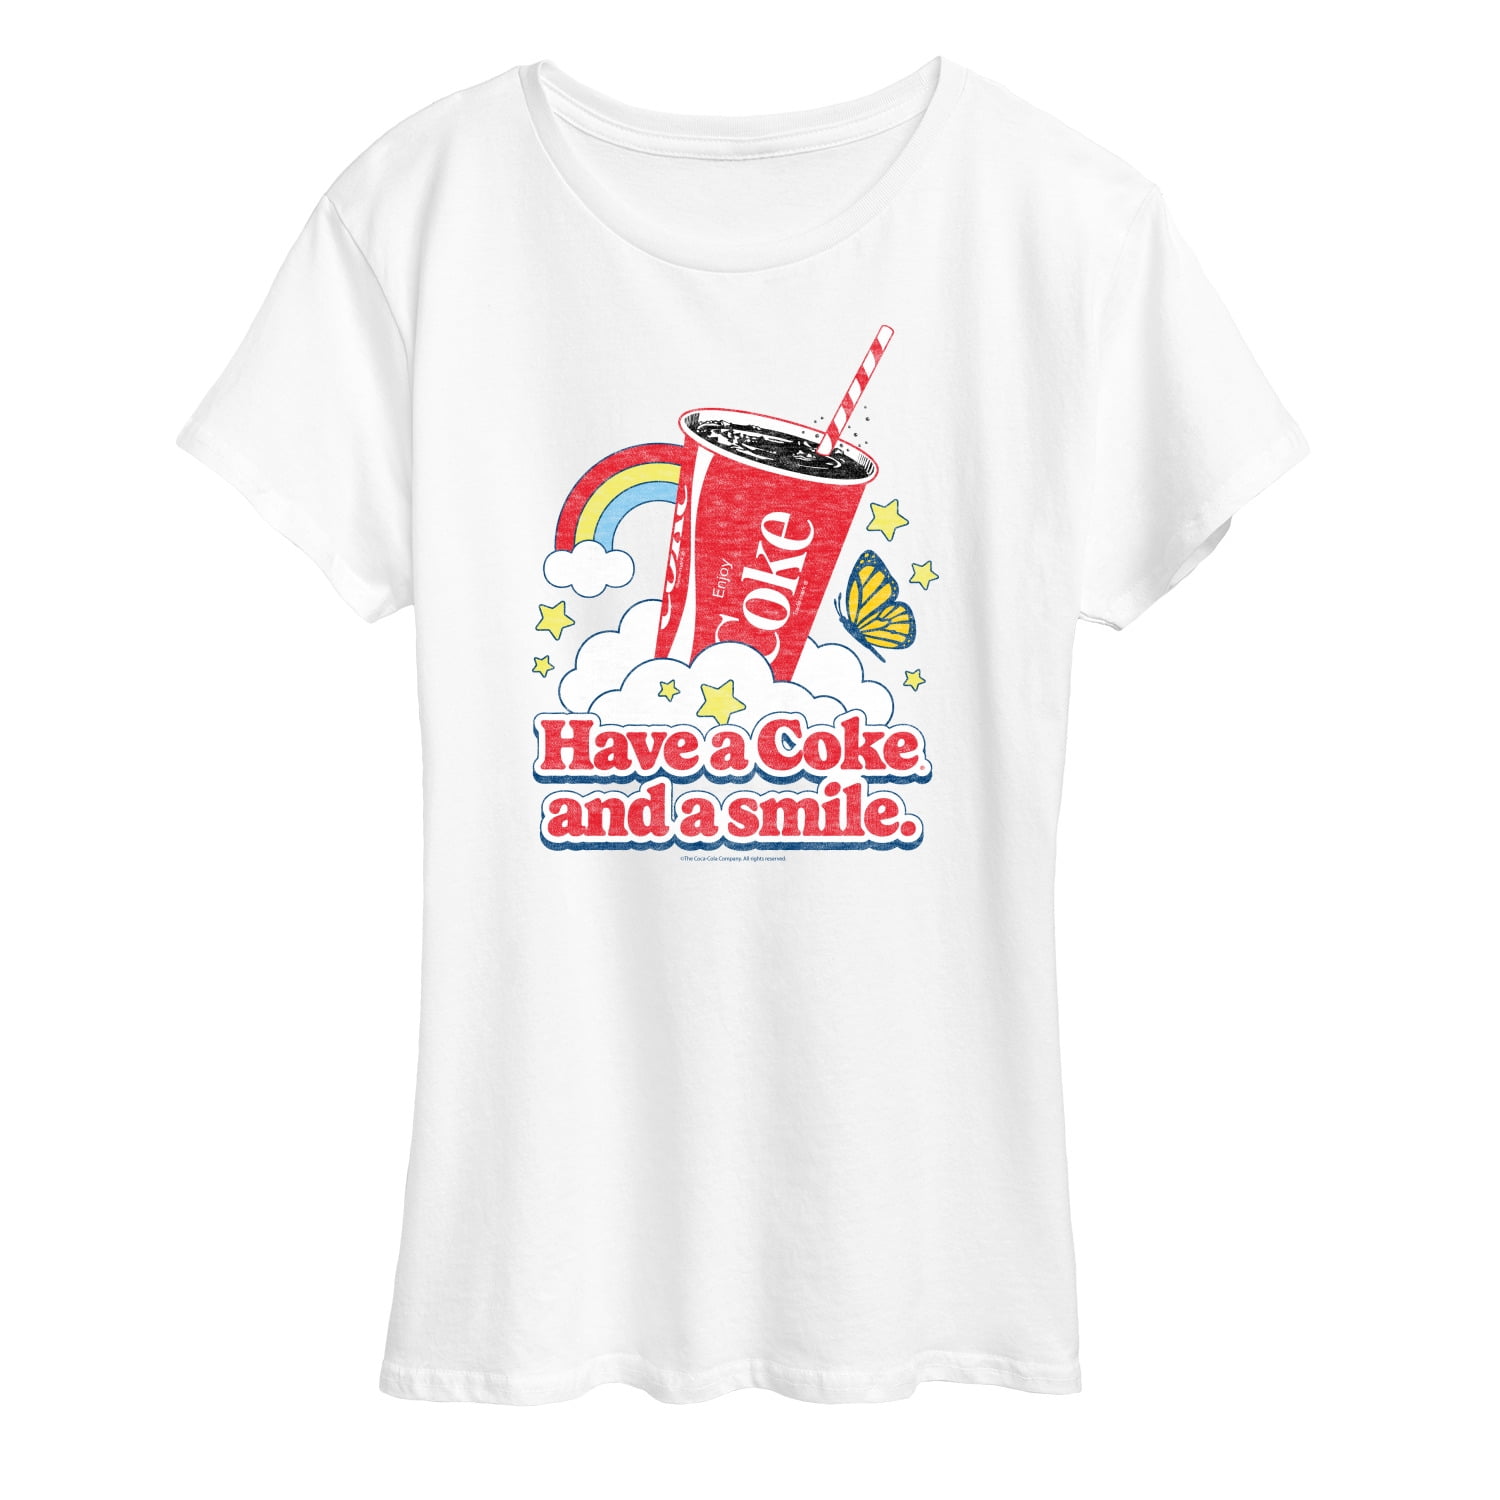 Coca-Cola - Have A Coke And A Smile - Women's Short Sleeve Graphic T-Shirt  